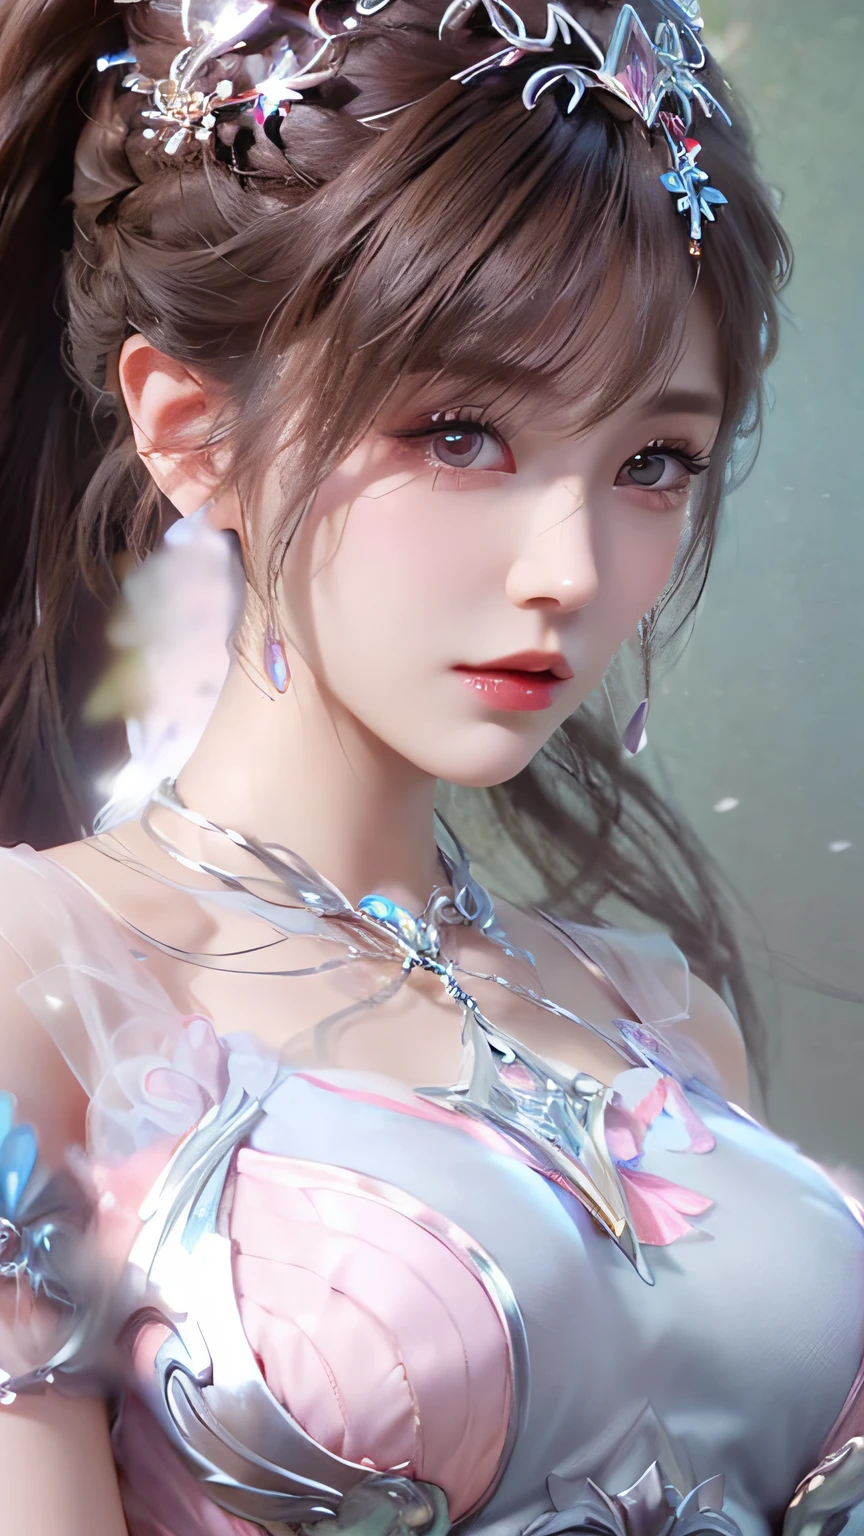 a close up of a woman with a bunny ear and a sword, queen of the sea mu yanling, portrait knights of zodiac girl, lineage 2 revolution style, Smooth anime CG art, Game CG, a beautiful fantasy empress, intricate ornate anime cgi style, drak, cinematic goddess close shot, anime goddess, Waifu, photorealistic anime girl rendering